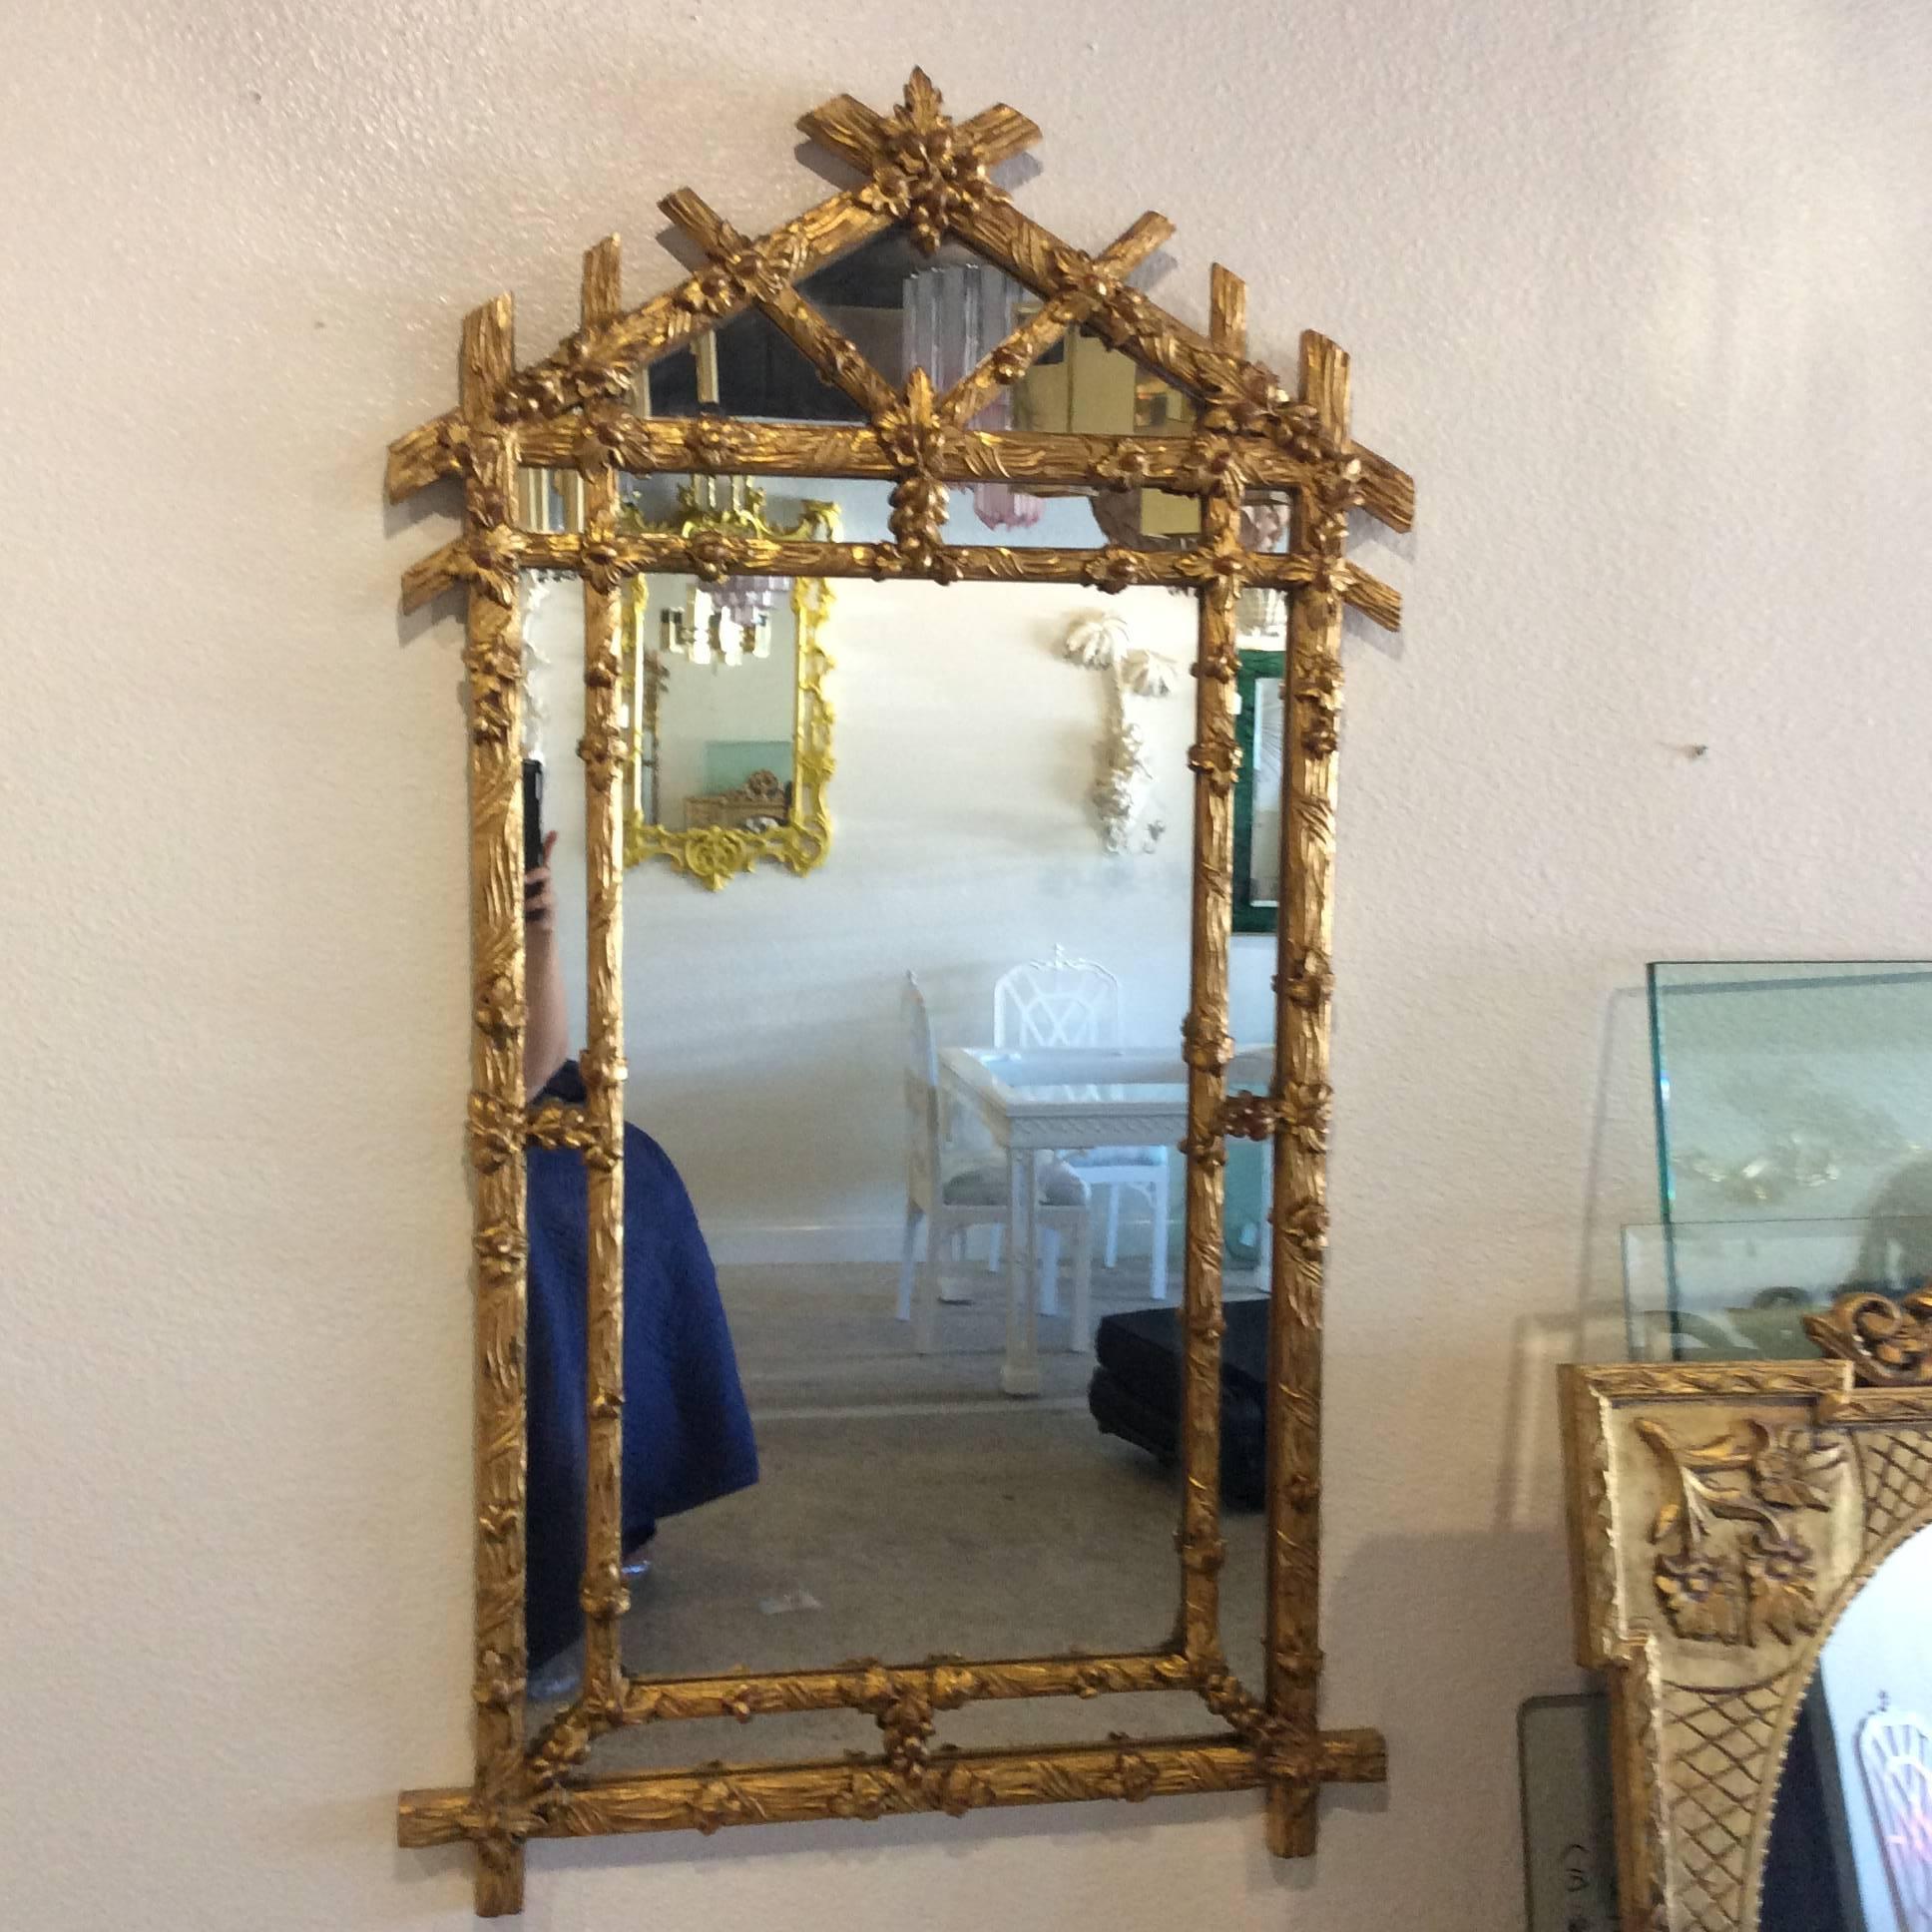 American Faux Bois Vintage Gold Giltwood Wall Mirror, Hollywood Regency Flowers Floral